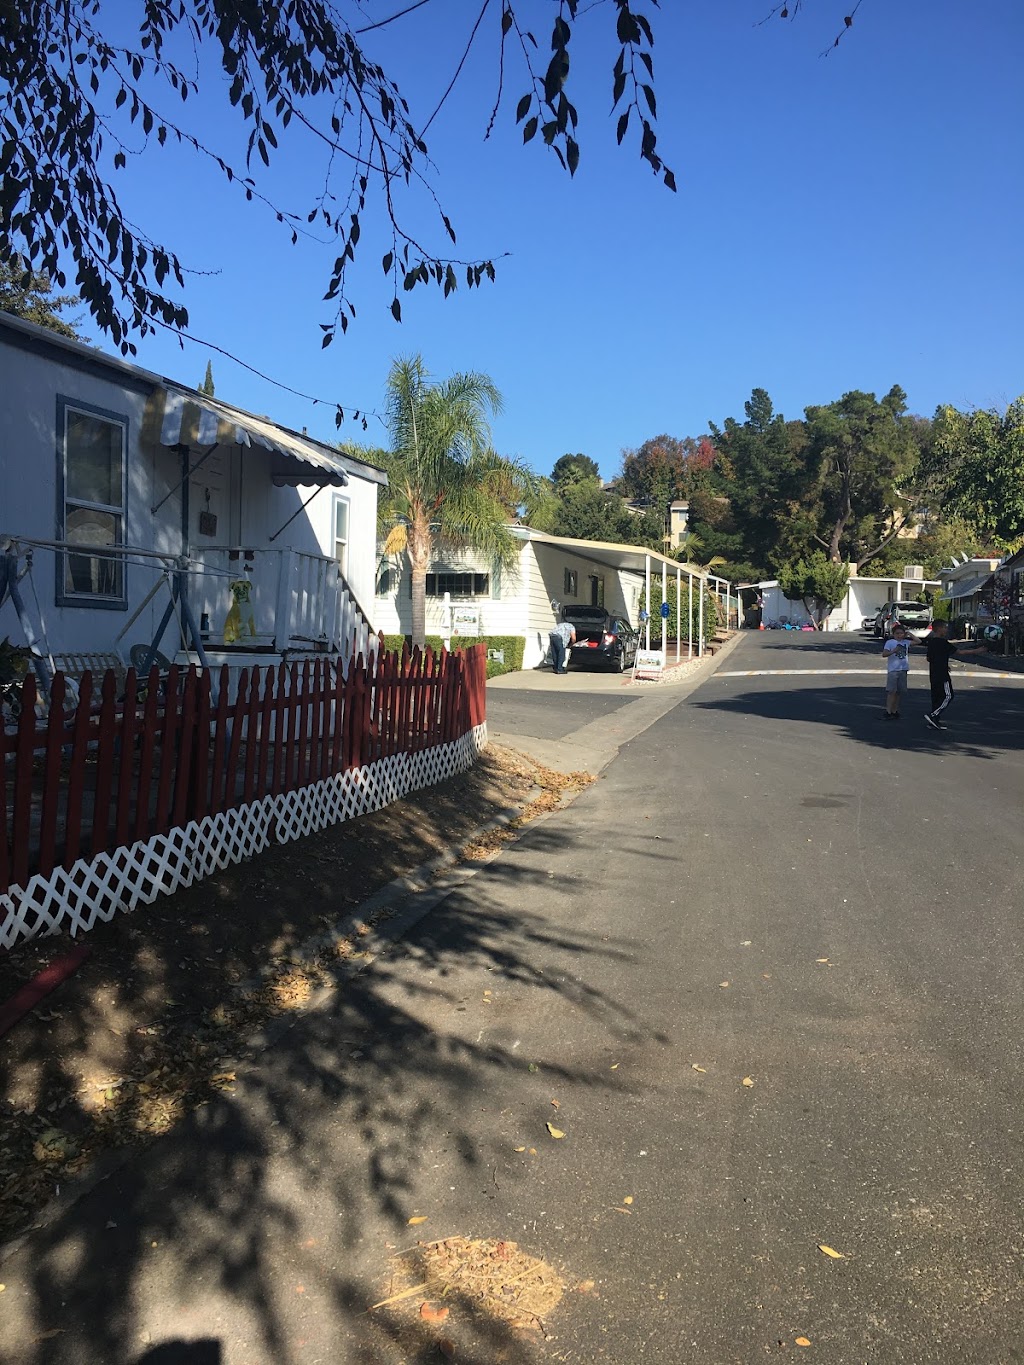 Sunny Acres Mobile Home & RV Park | 1080 San Miguel Rd, Concord, CA 94518 | Phone: (925) 685-7048